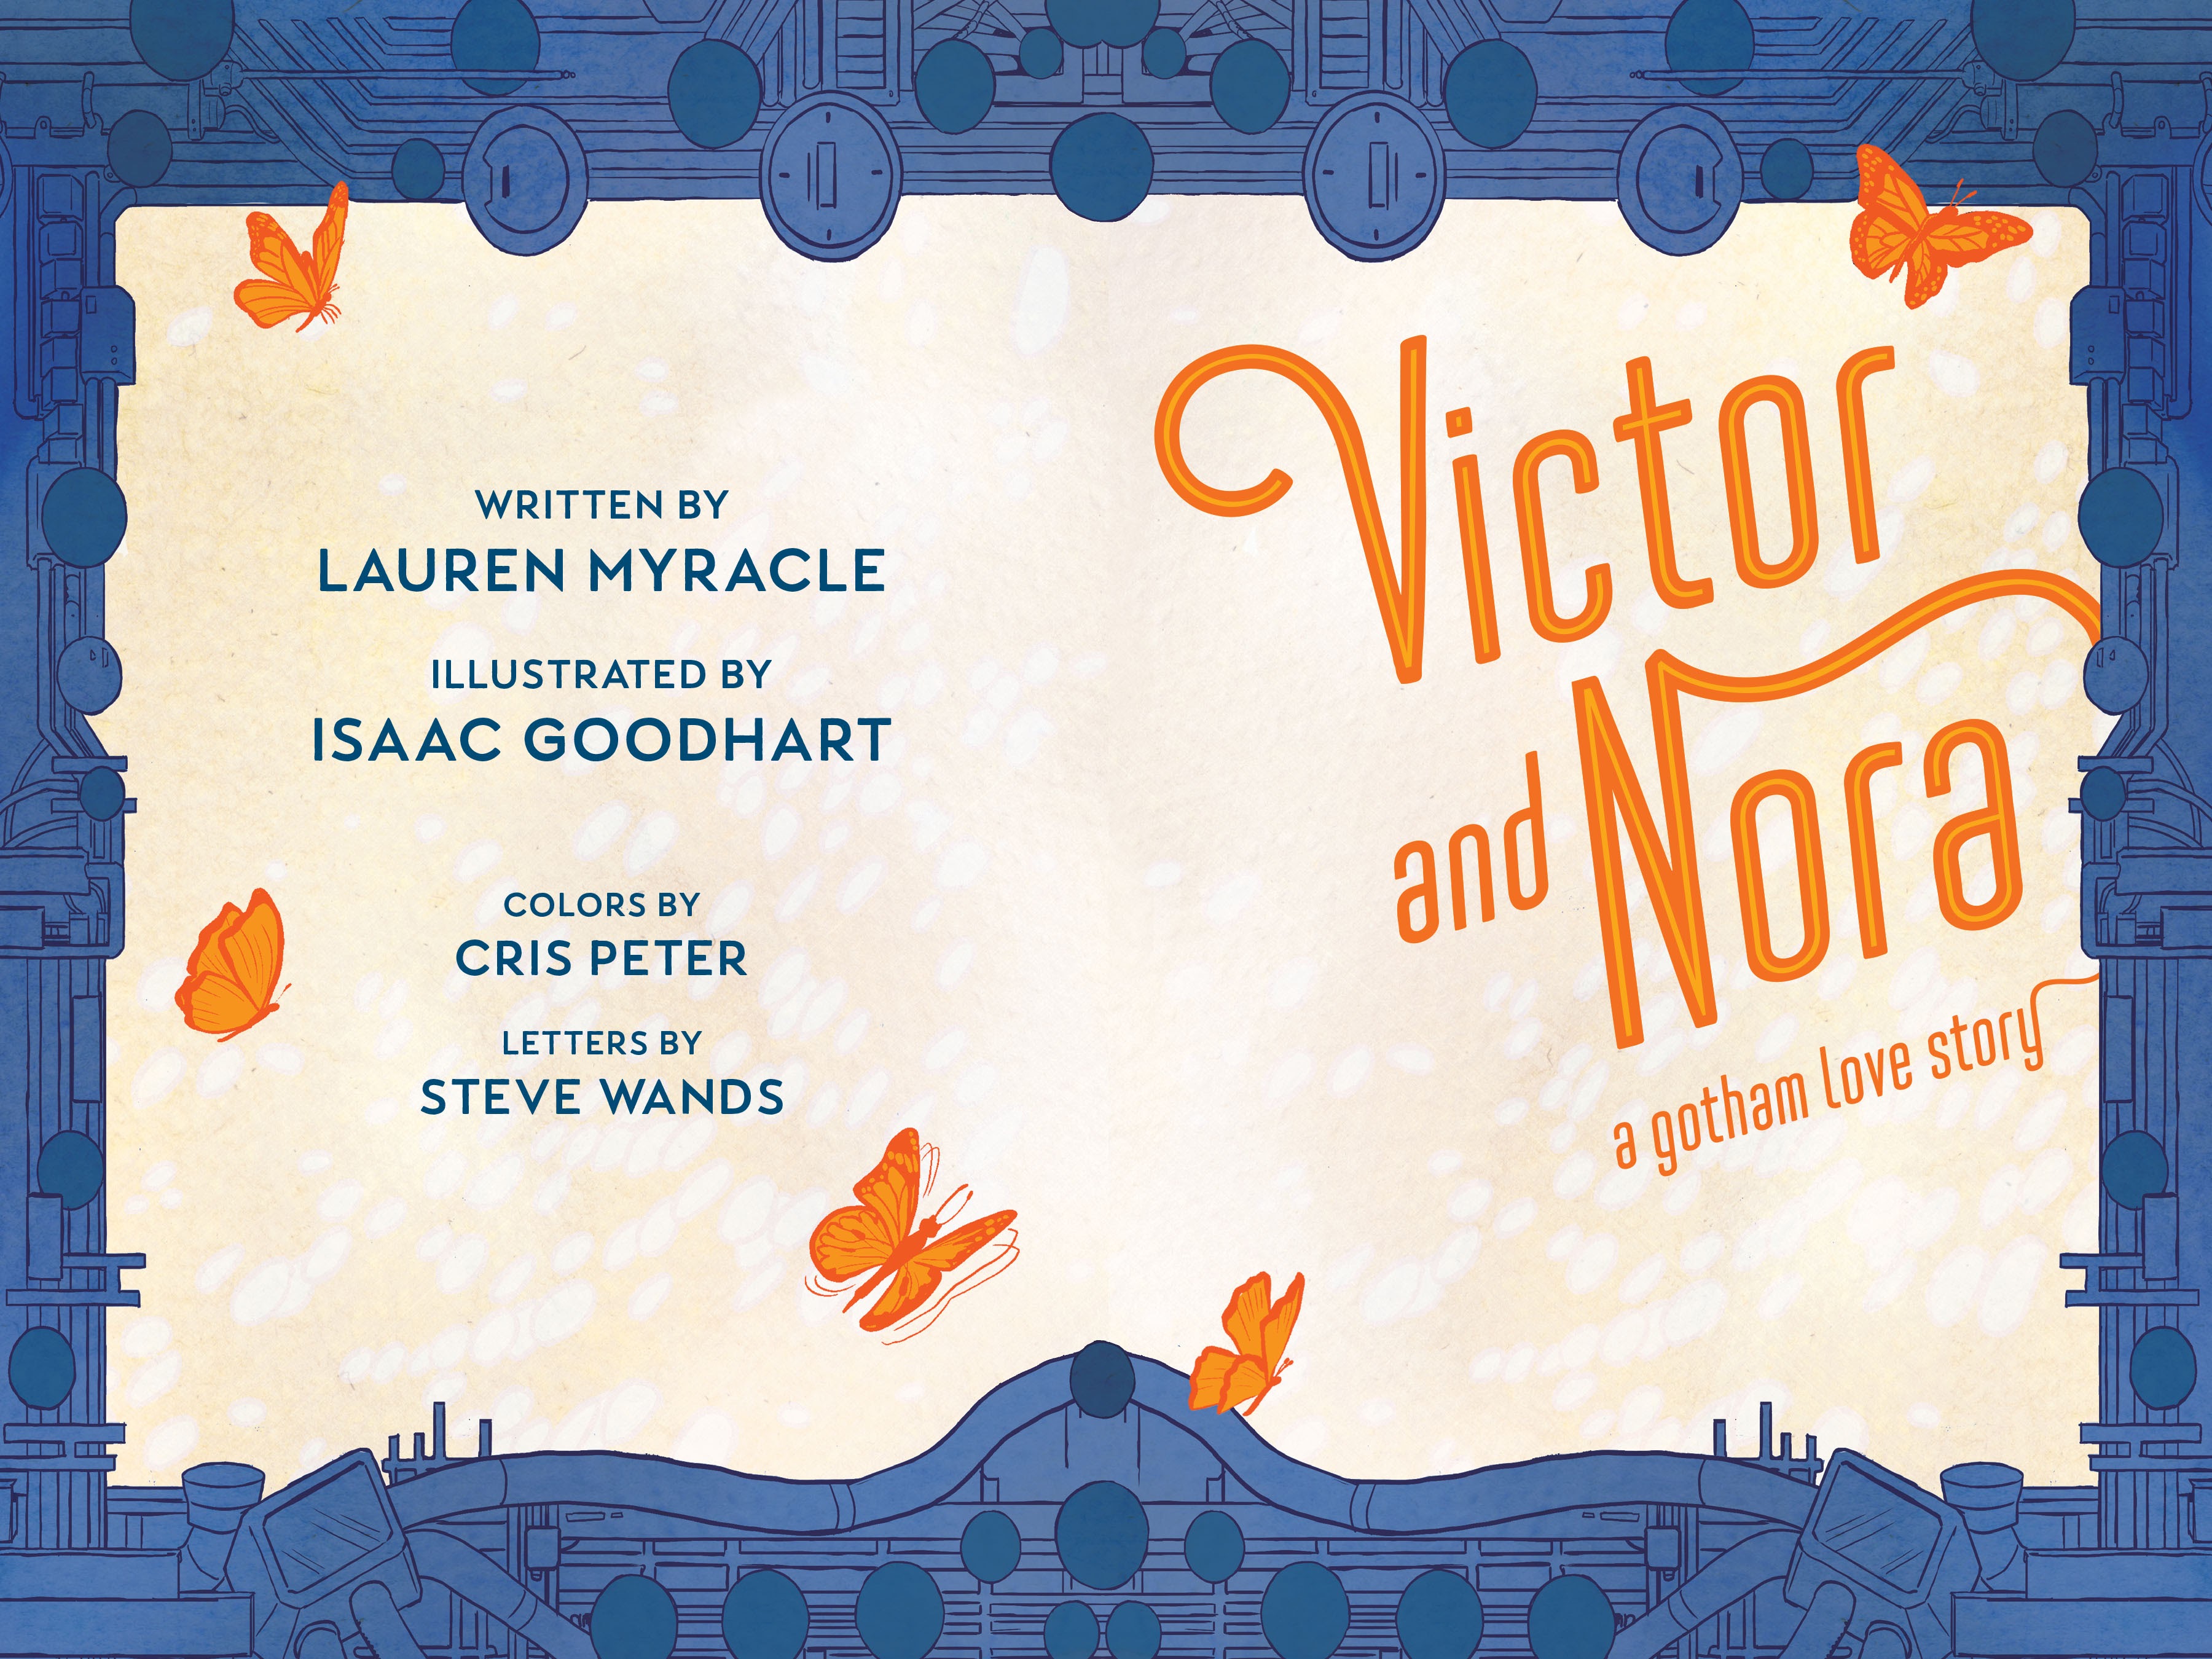 Read online Victor and Nora: A Gotham Love Story comic -  Issue # TPB (Part 1) - 3